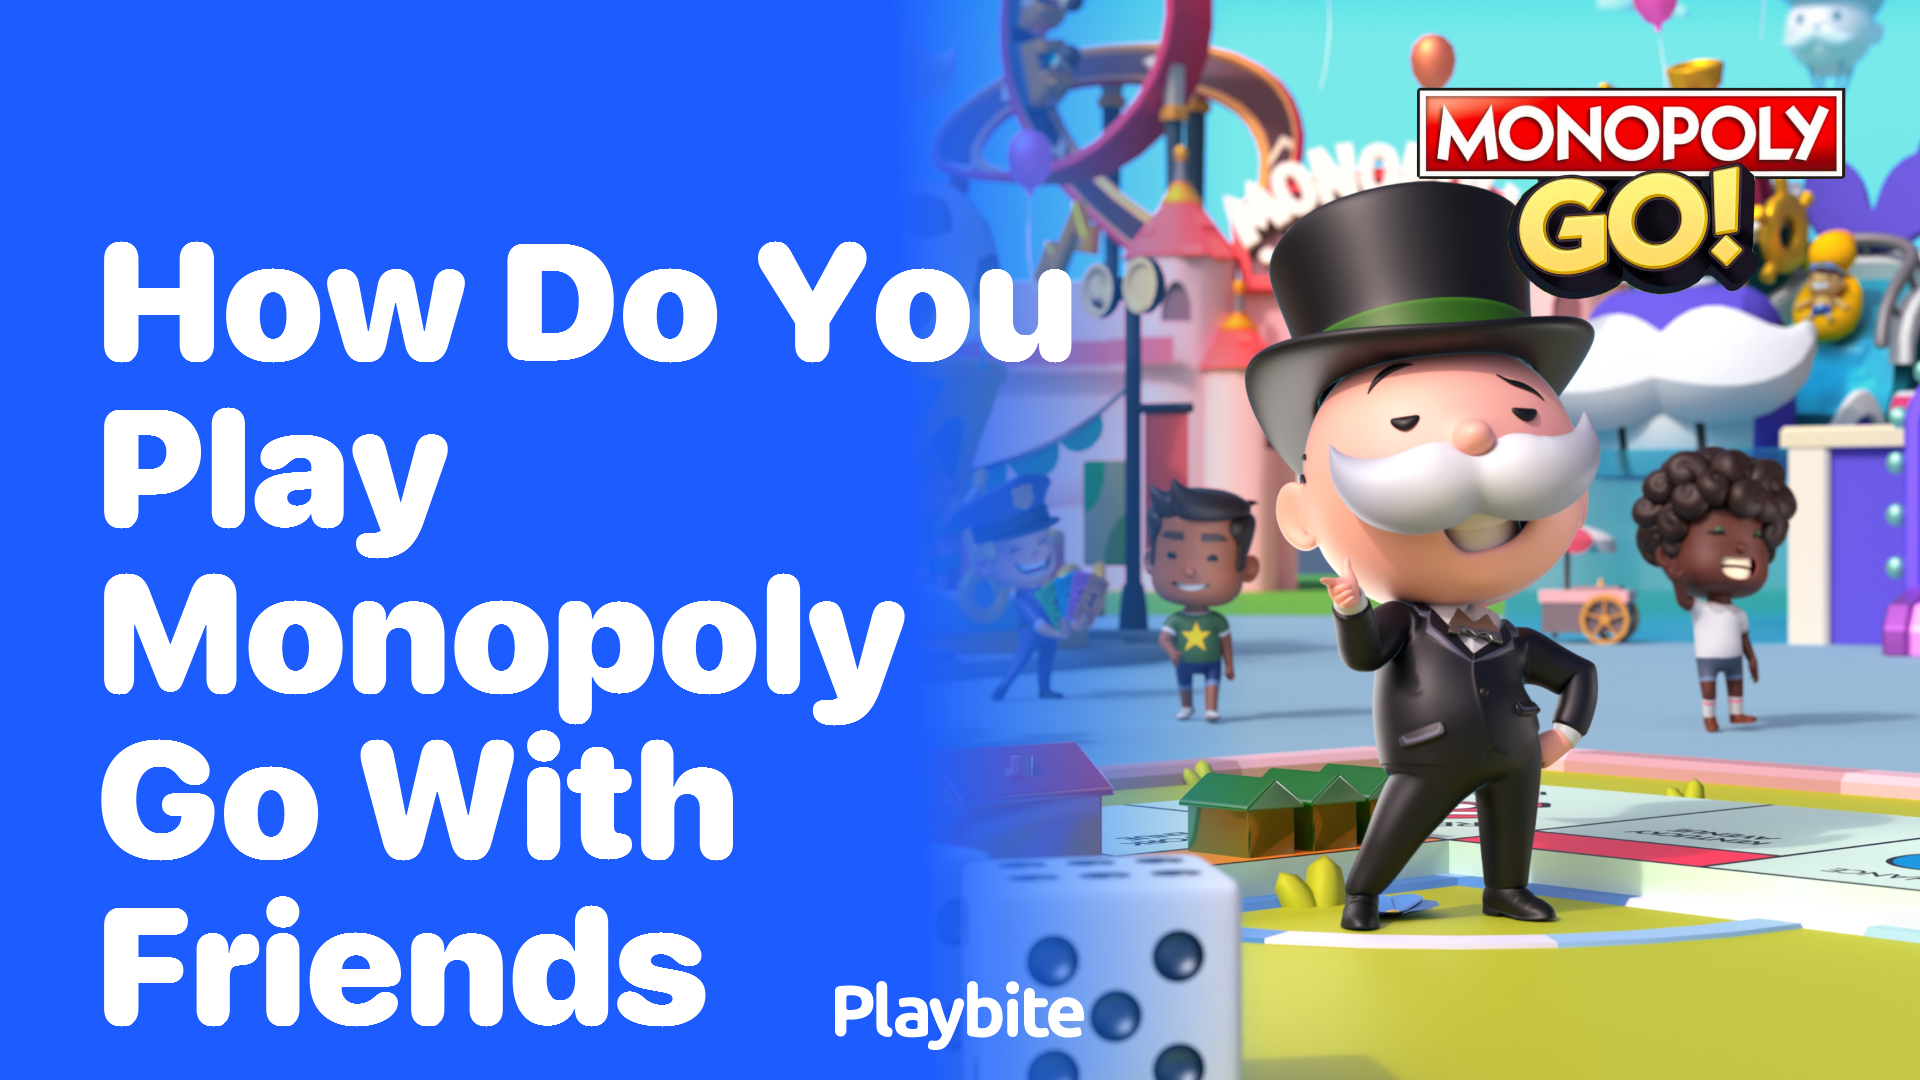 How Do You Play Monopoly Go With Friends?